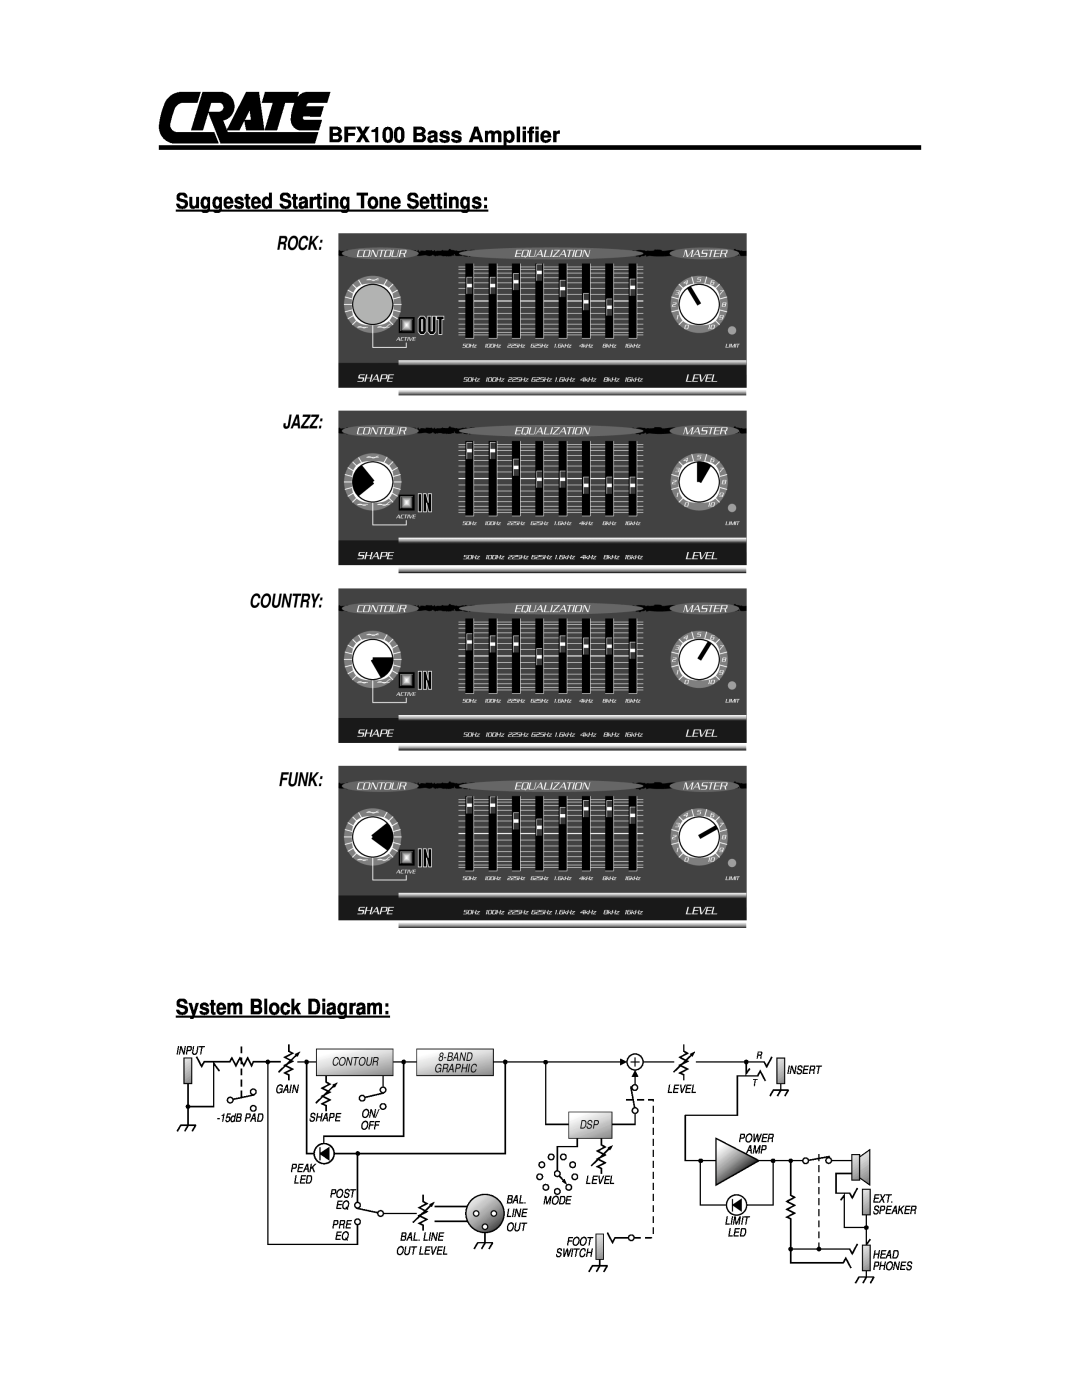 Crate Amplifiers Suggested Starting Tone Settings, System Block Diagram, BFX100 Bass Amplifier, Rock, Jazz, Country 